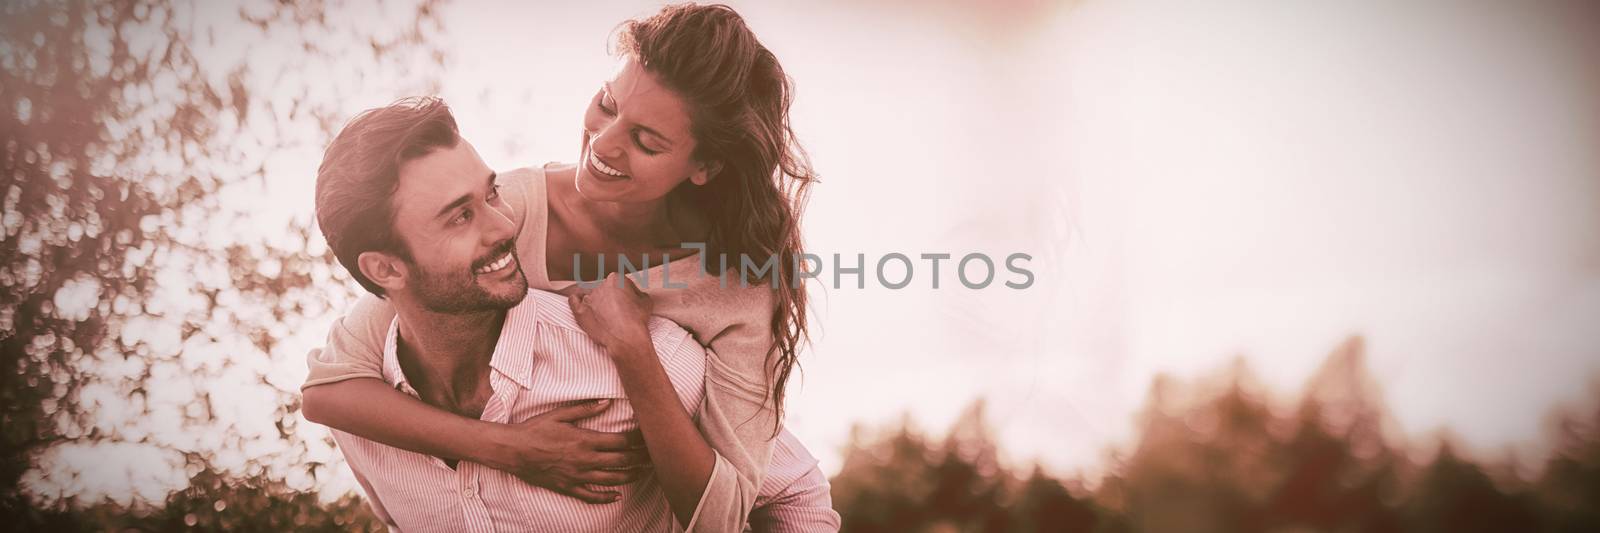 Smiling young man piggybacking woman at farm during sunny day